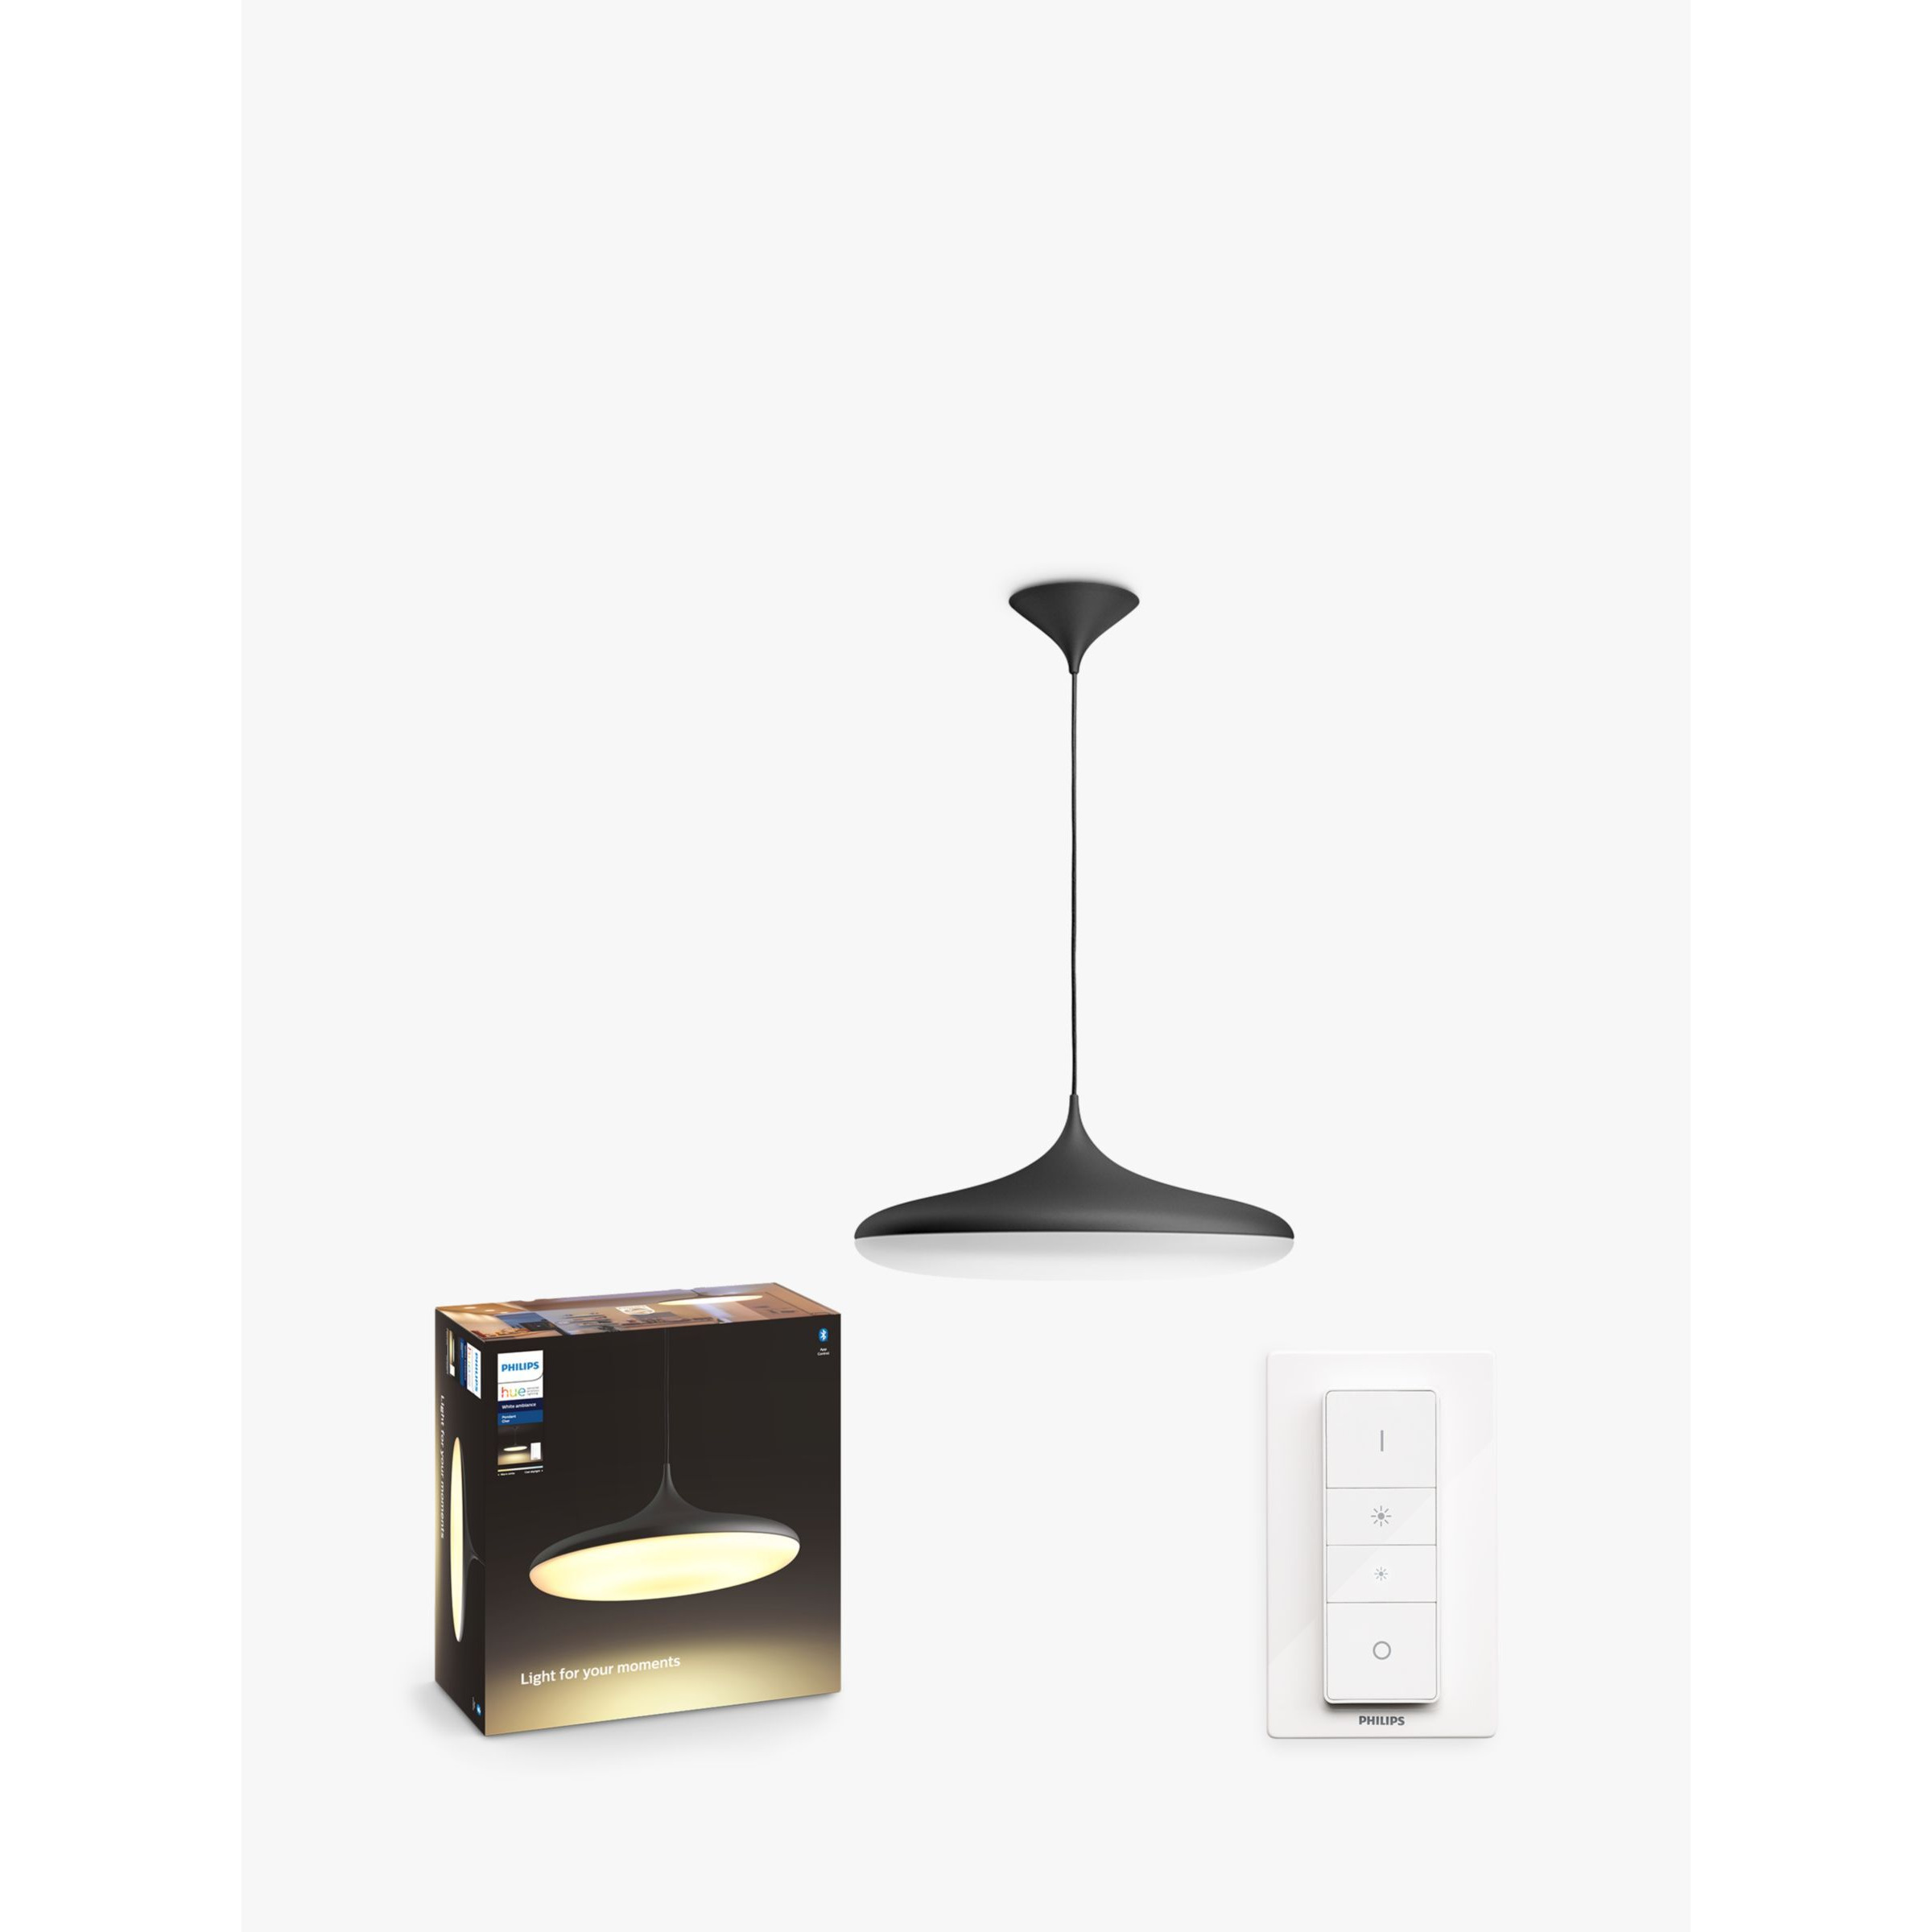 Philips Hue White Ambiance Cher LED Smart Ceiling Light with Bluetooth and Dimmer Switch - image 1